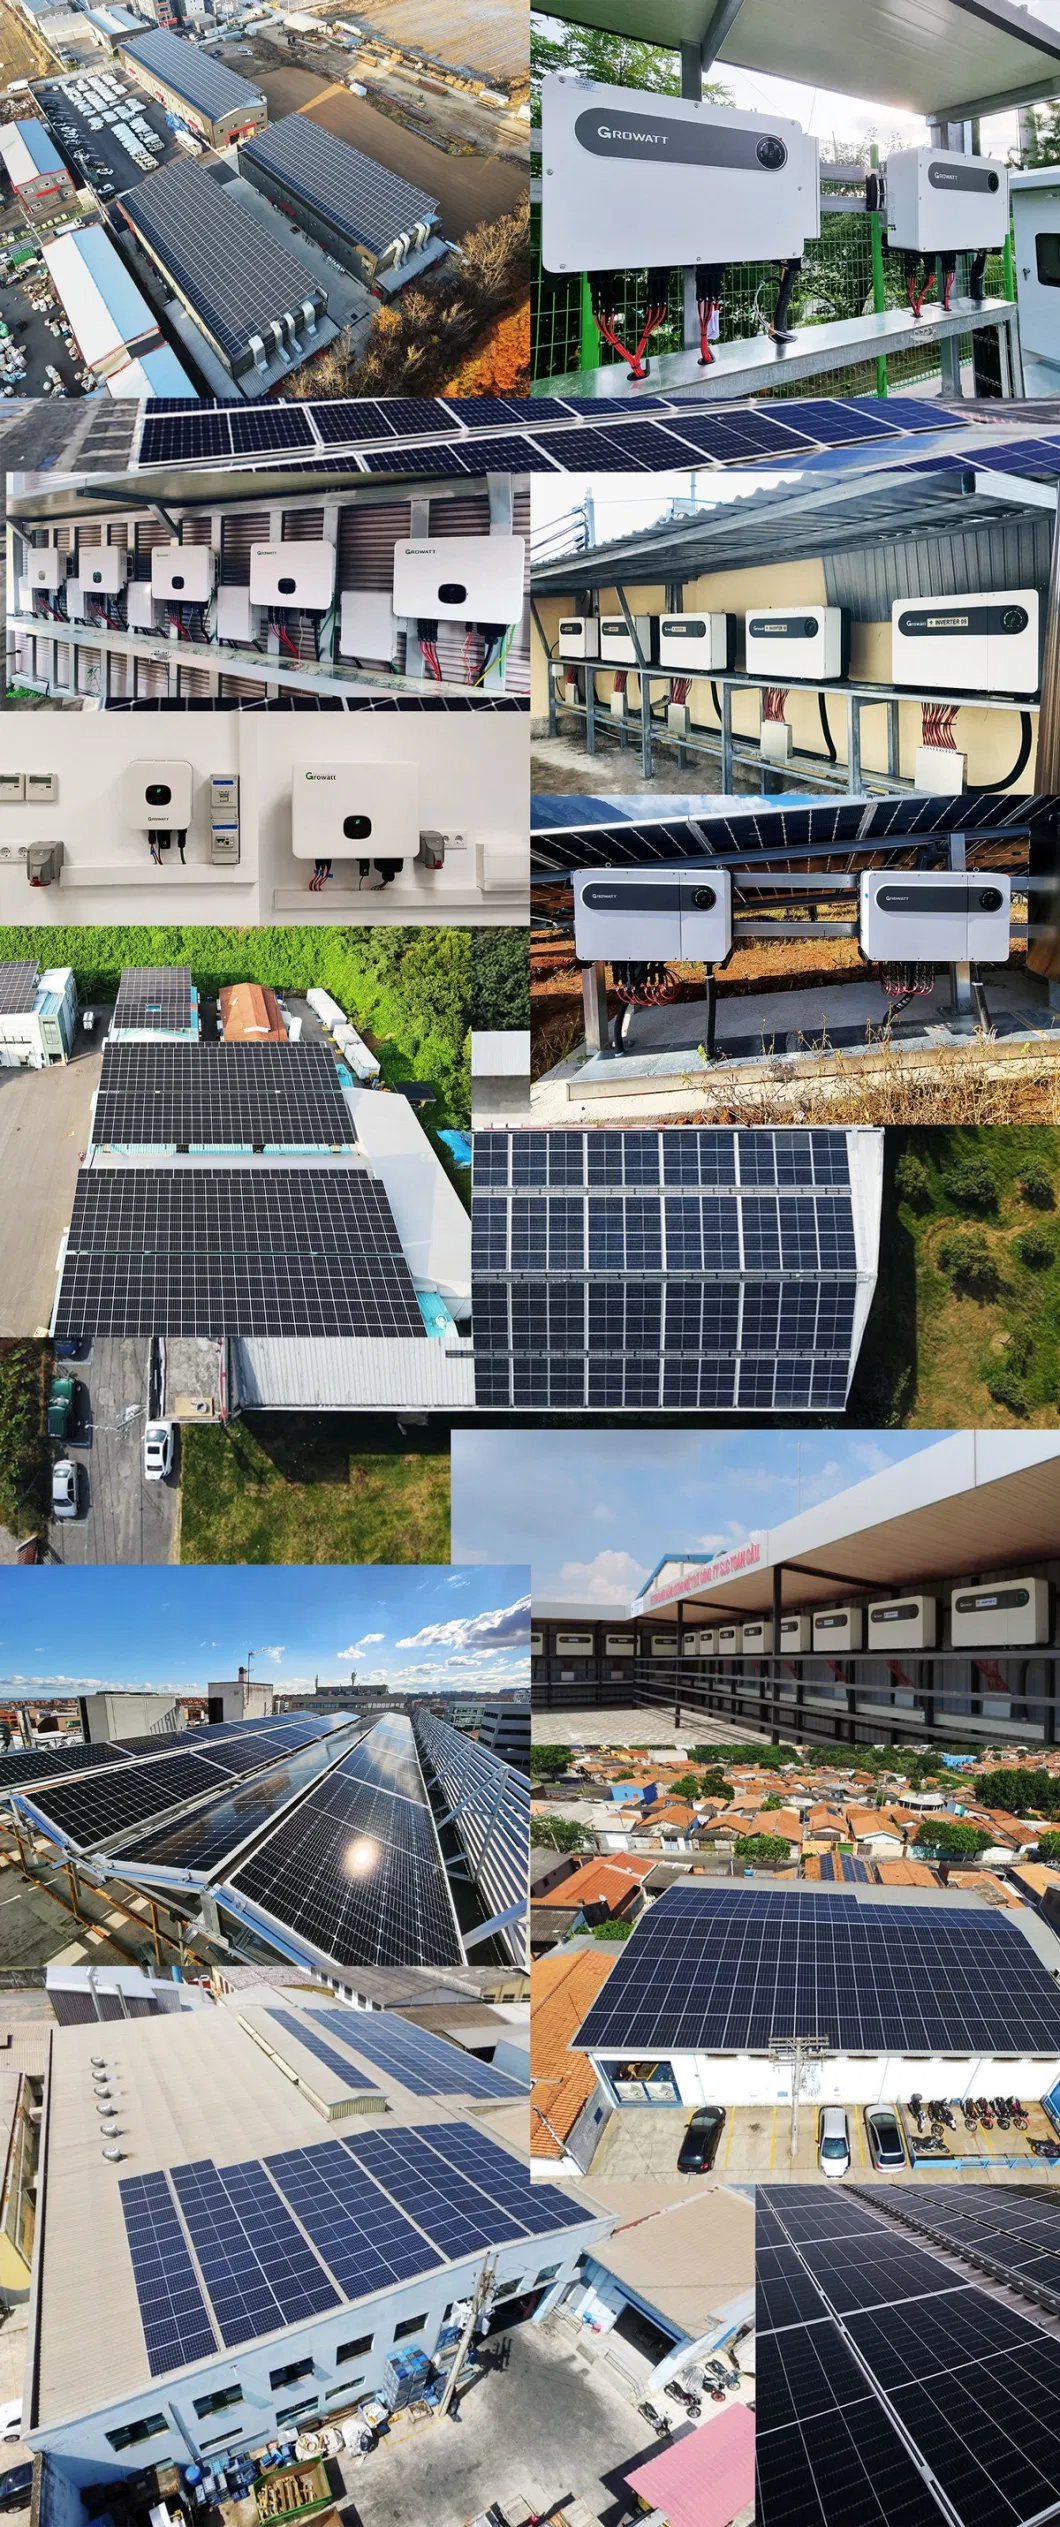 New Arrival Competitive Price Solar System 20 Kw 20kw Solar System for Sale 20kw 25kw Solar System Homeuse